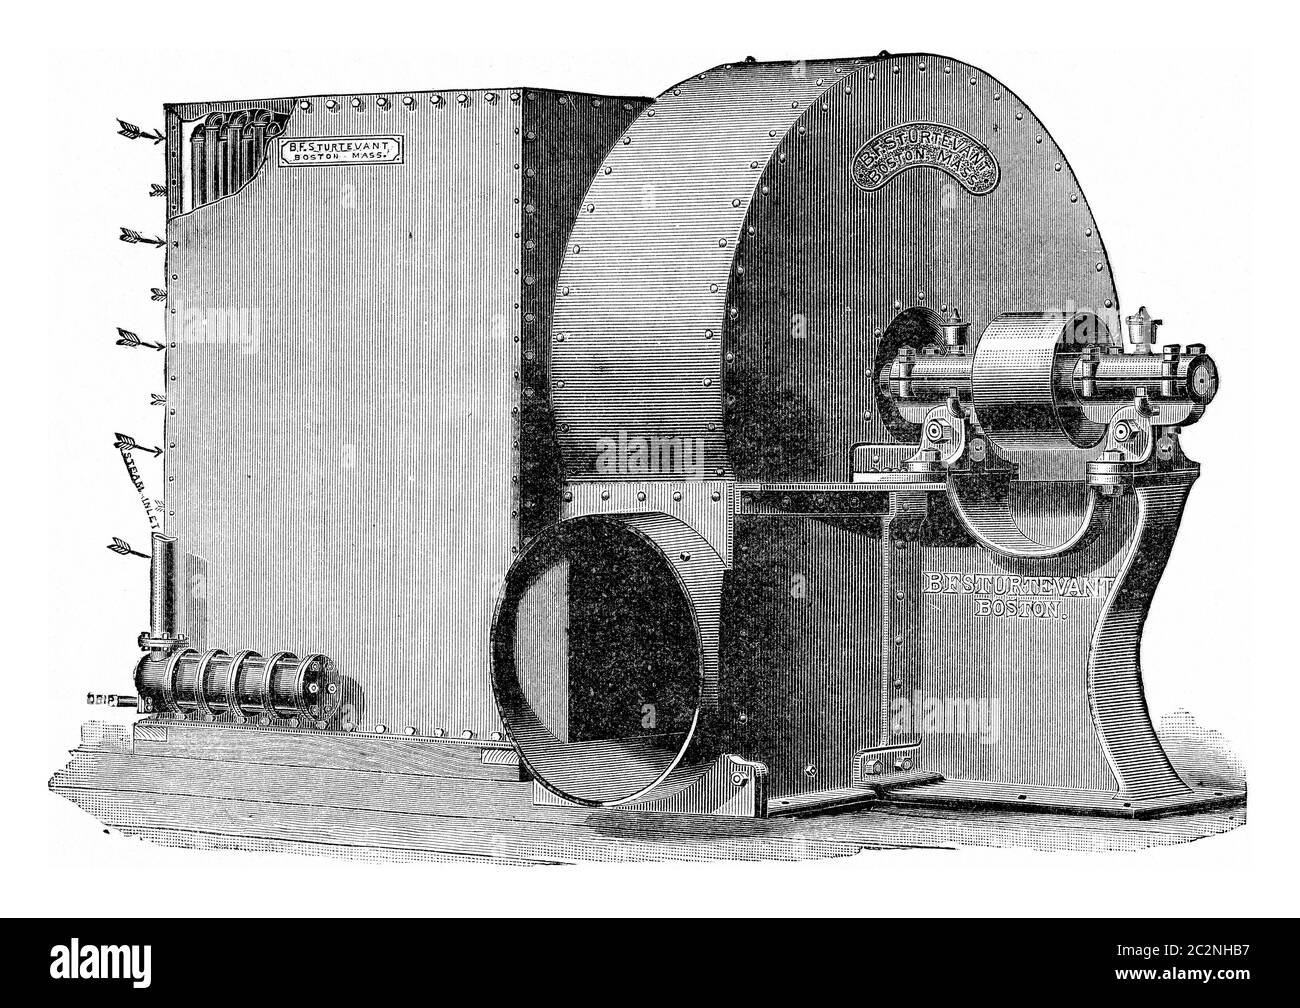 Group calorigenic Sturtevant, with fan control via pulley, vintage engraved illustration. Stock Photo